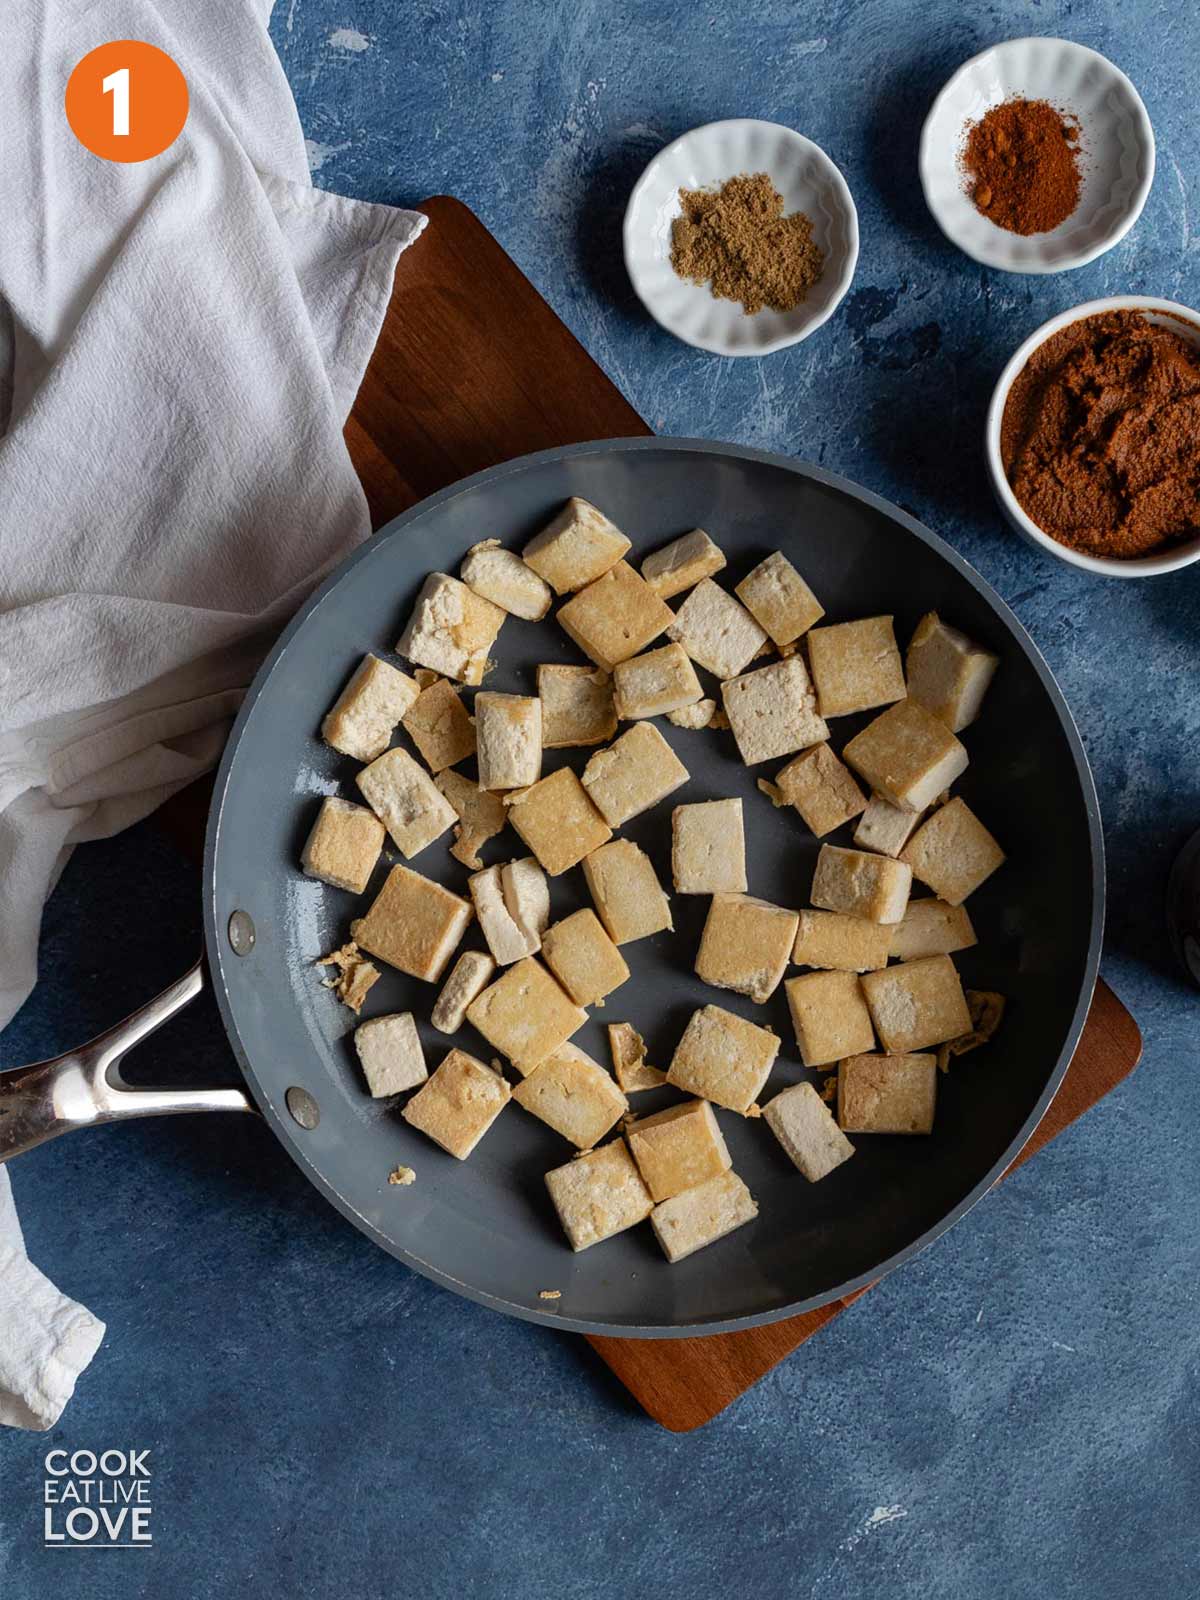 Tofu cooking in a skillet.